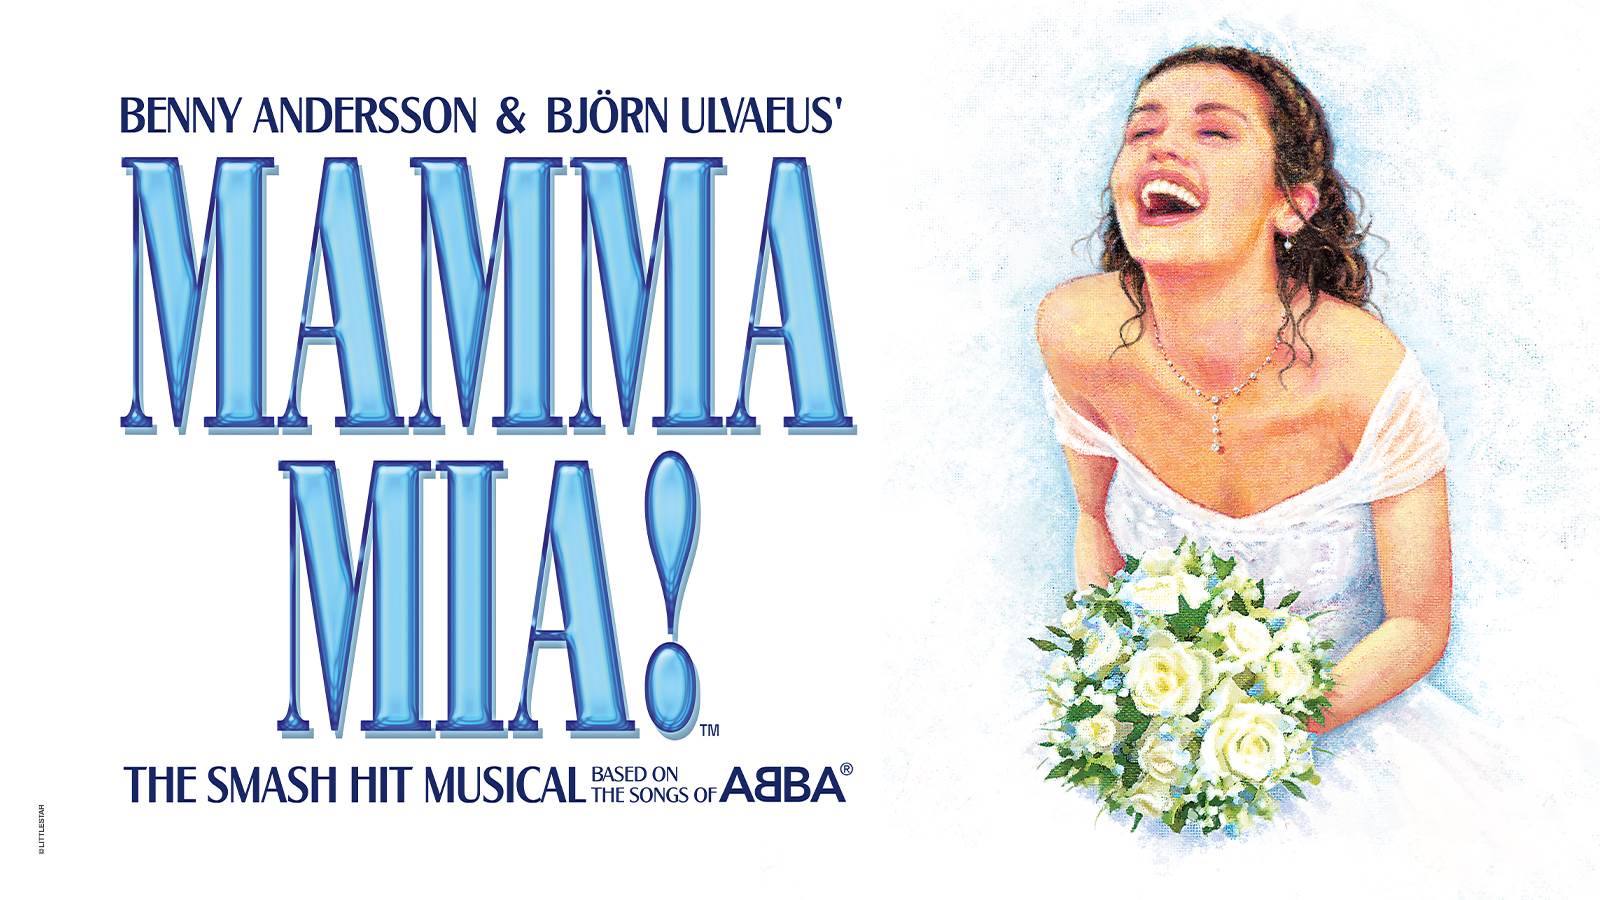 Mamma Mia returning to theaters for 10th anniversary screenings